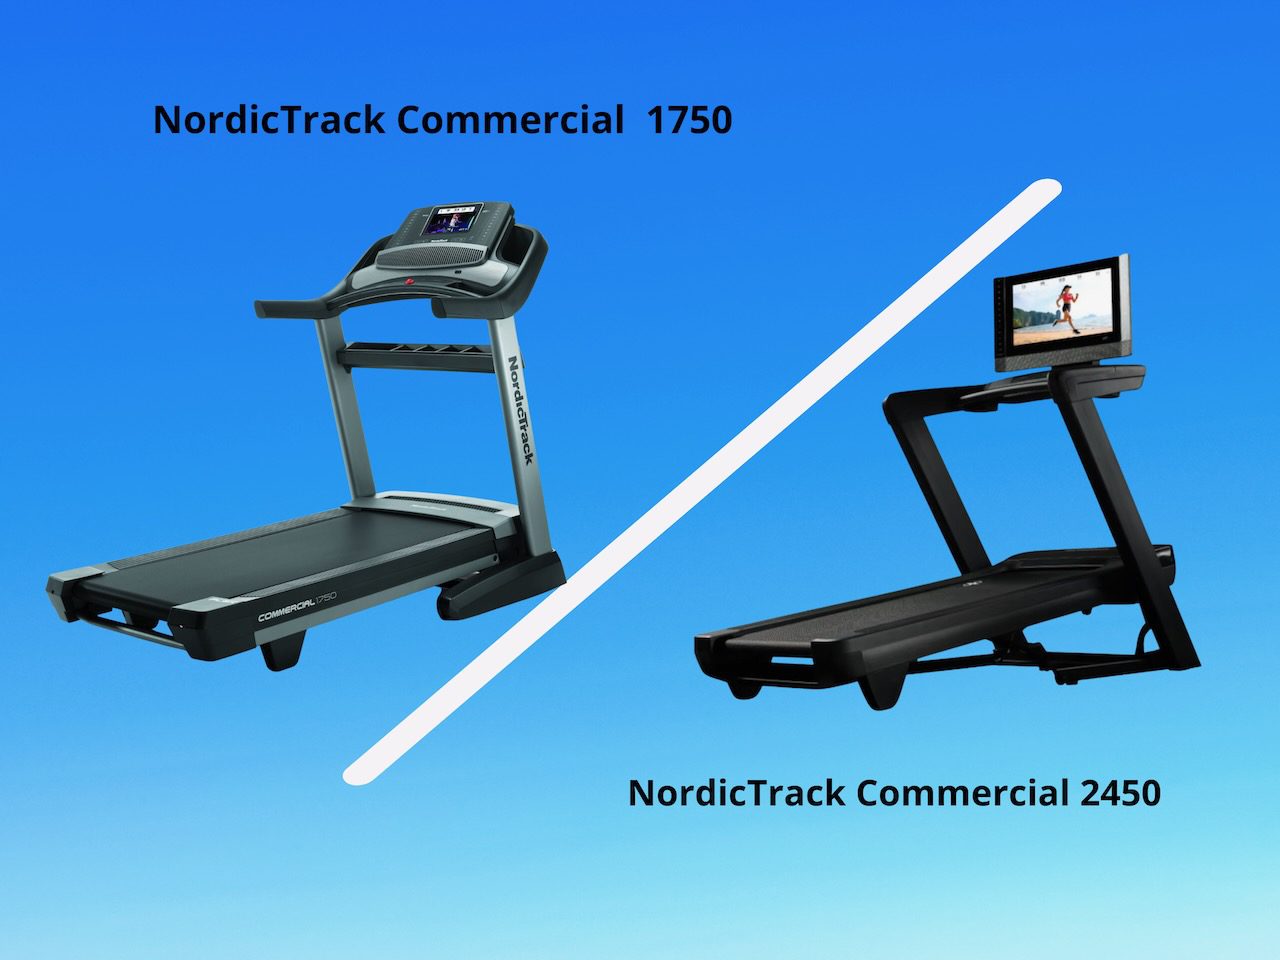 Featured image for “NordicTrack Commercial 1750 vs. Commercial 2450”